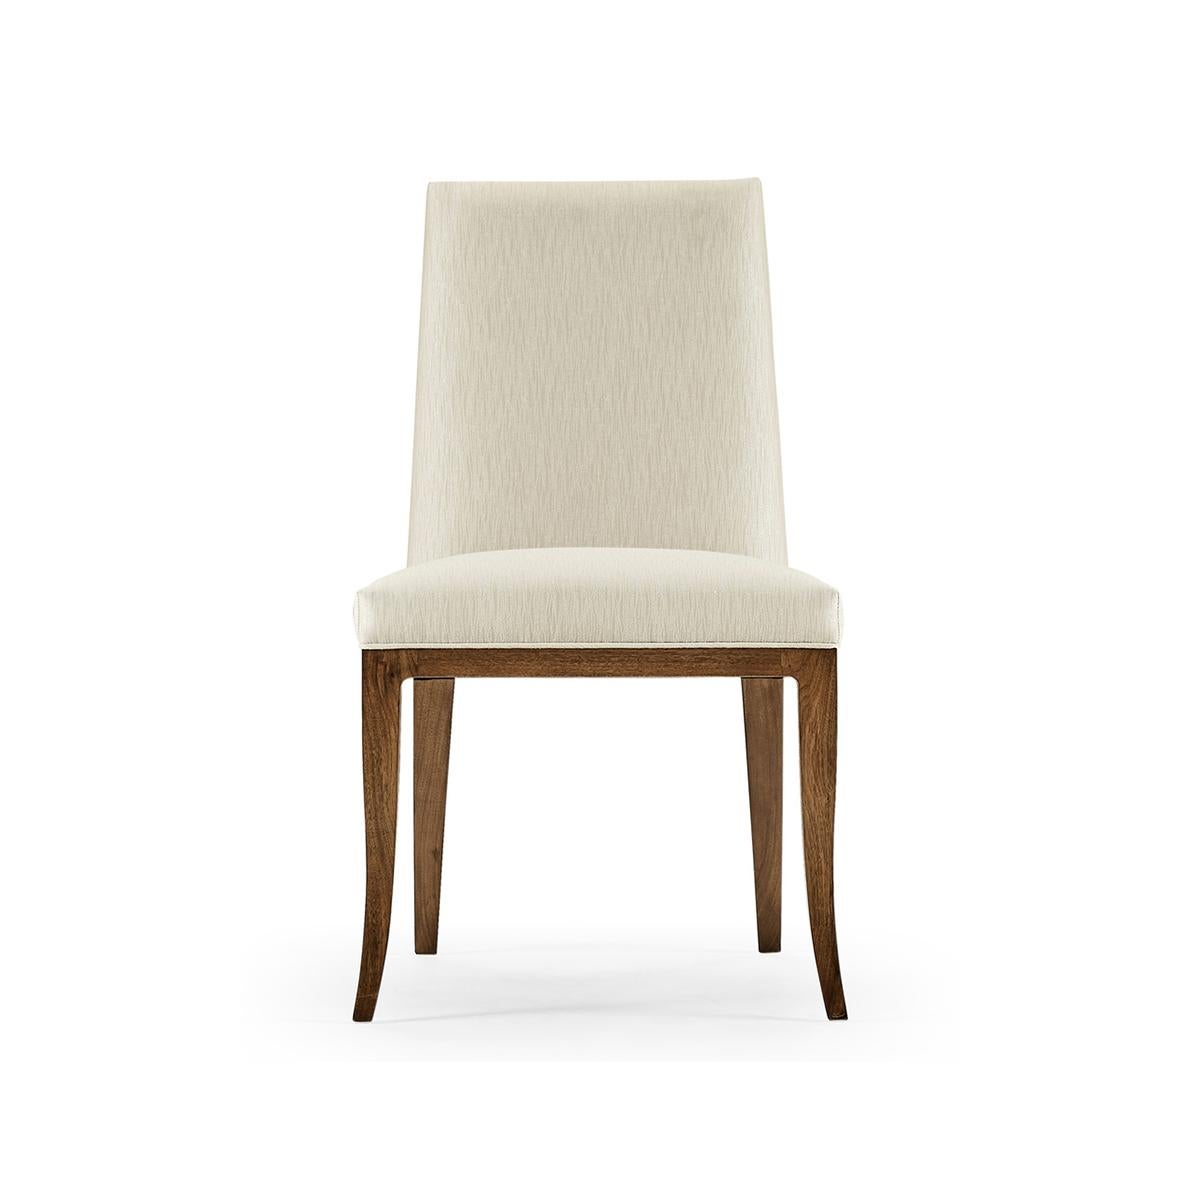 A perfect blend of luxury and comfort for your dining space. Crafted with a sleek wooden frame of high-quality American walnut, this chair exudes sophistication. The wood has a hand-rubbed lacquer finish, enhancing its natural beauty and ensuring